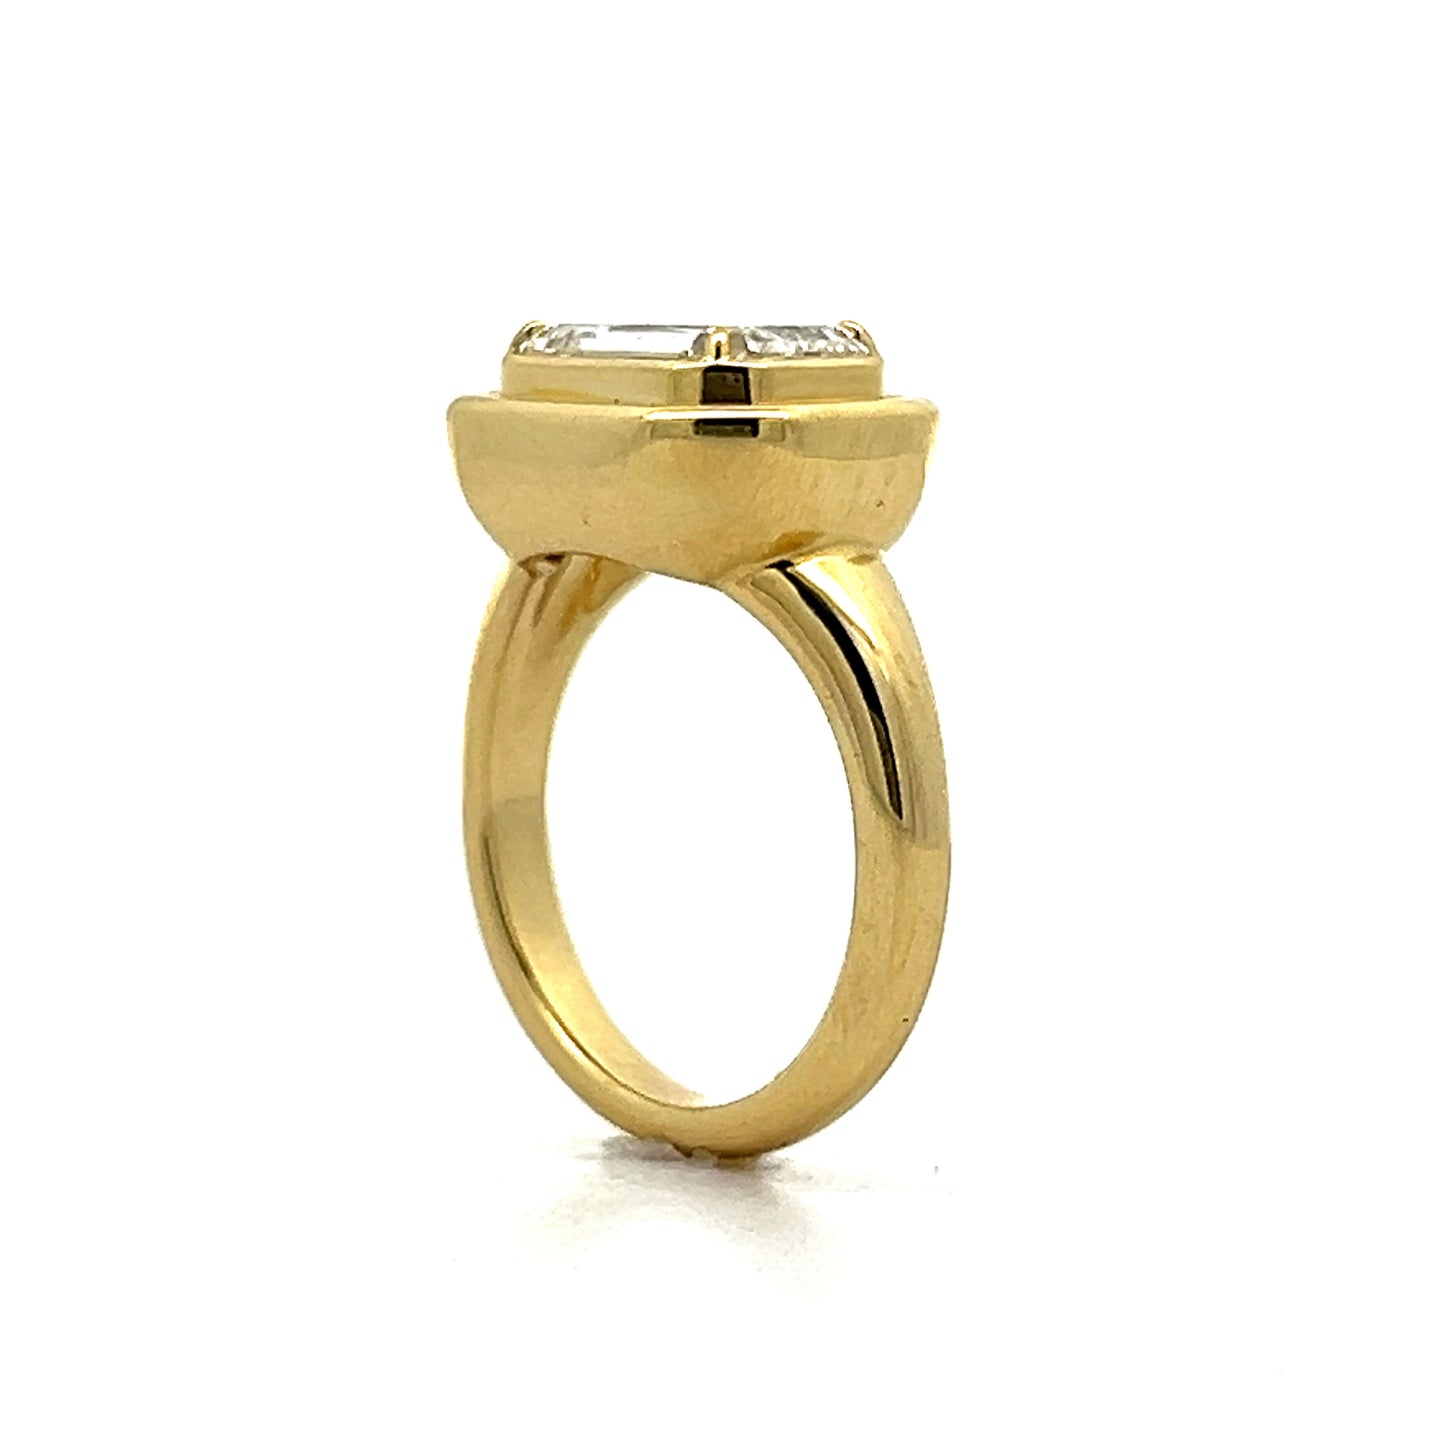 3.02 Emerald Cut Diamond Engagement Ring in Yellow Gold